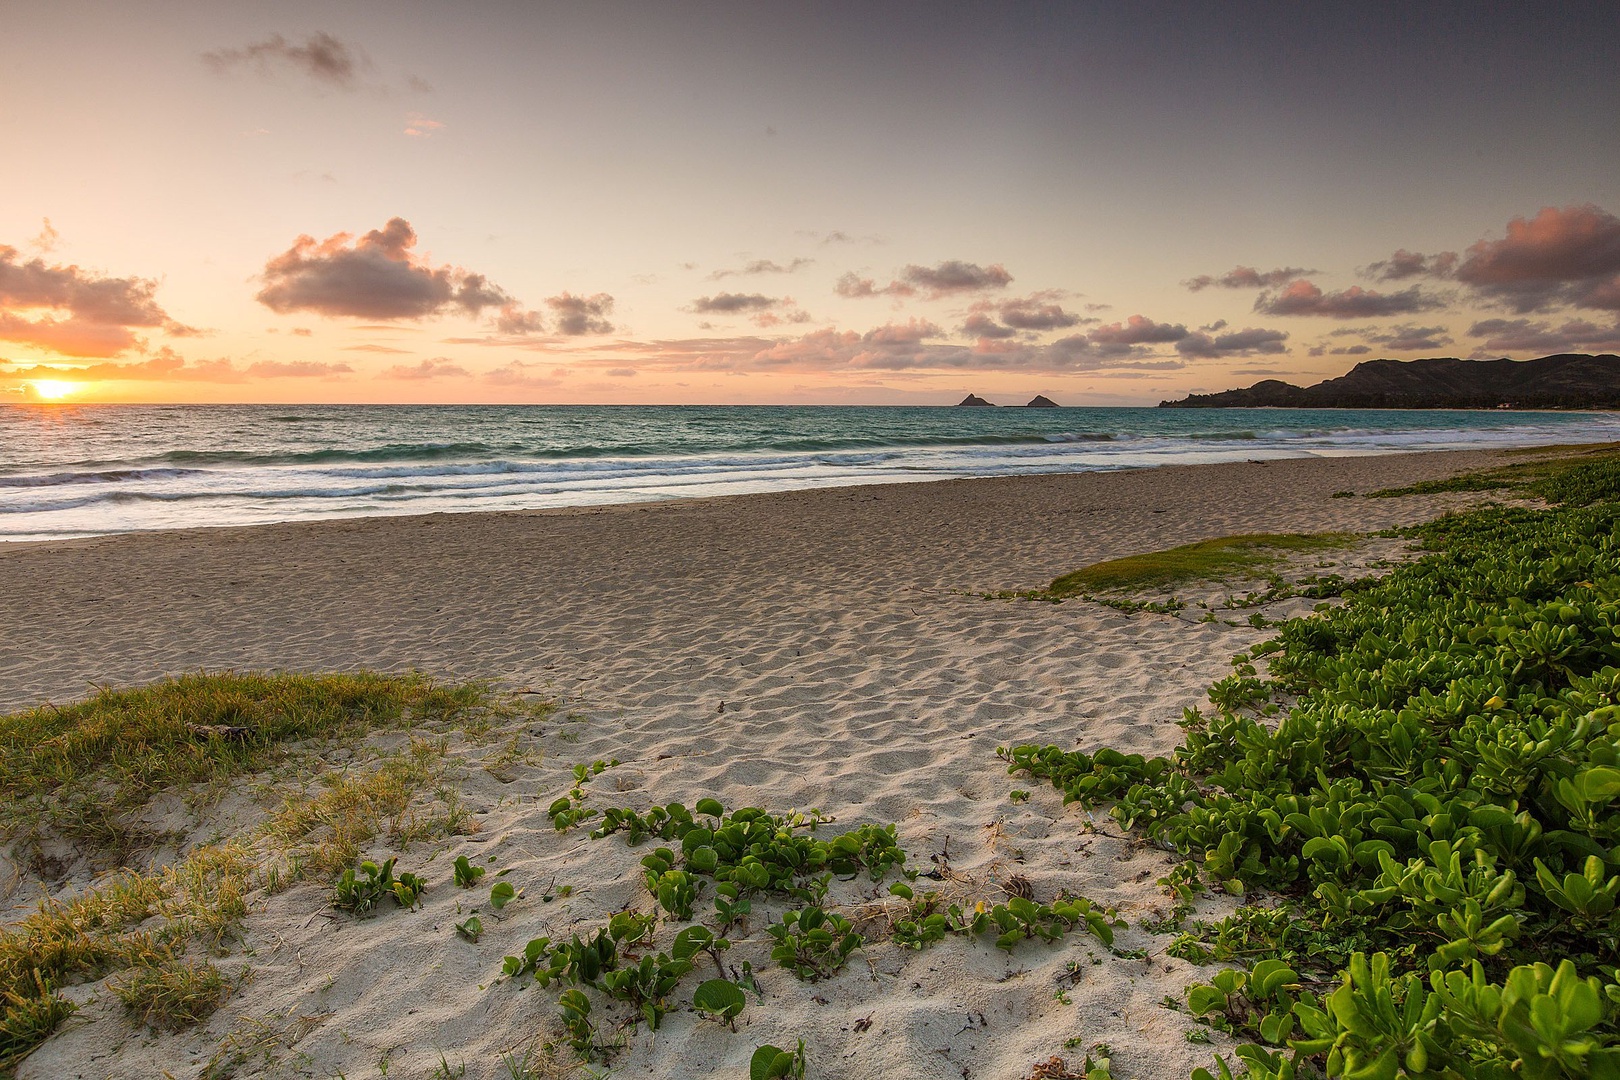 Kailua Vacation Rentals, Maluhia - Get lost in the tranquil beauty of Kailua Beach, where the soft white sand and crystal-clear water are the perfect backdrop for your next tropical adventure